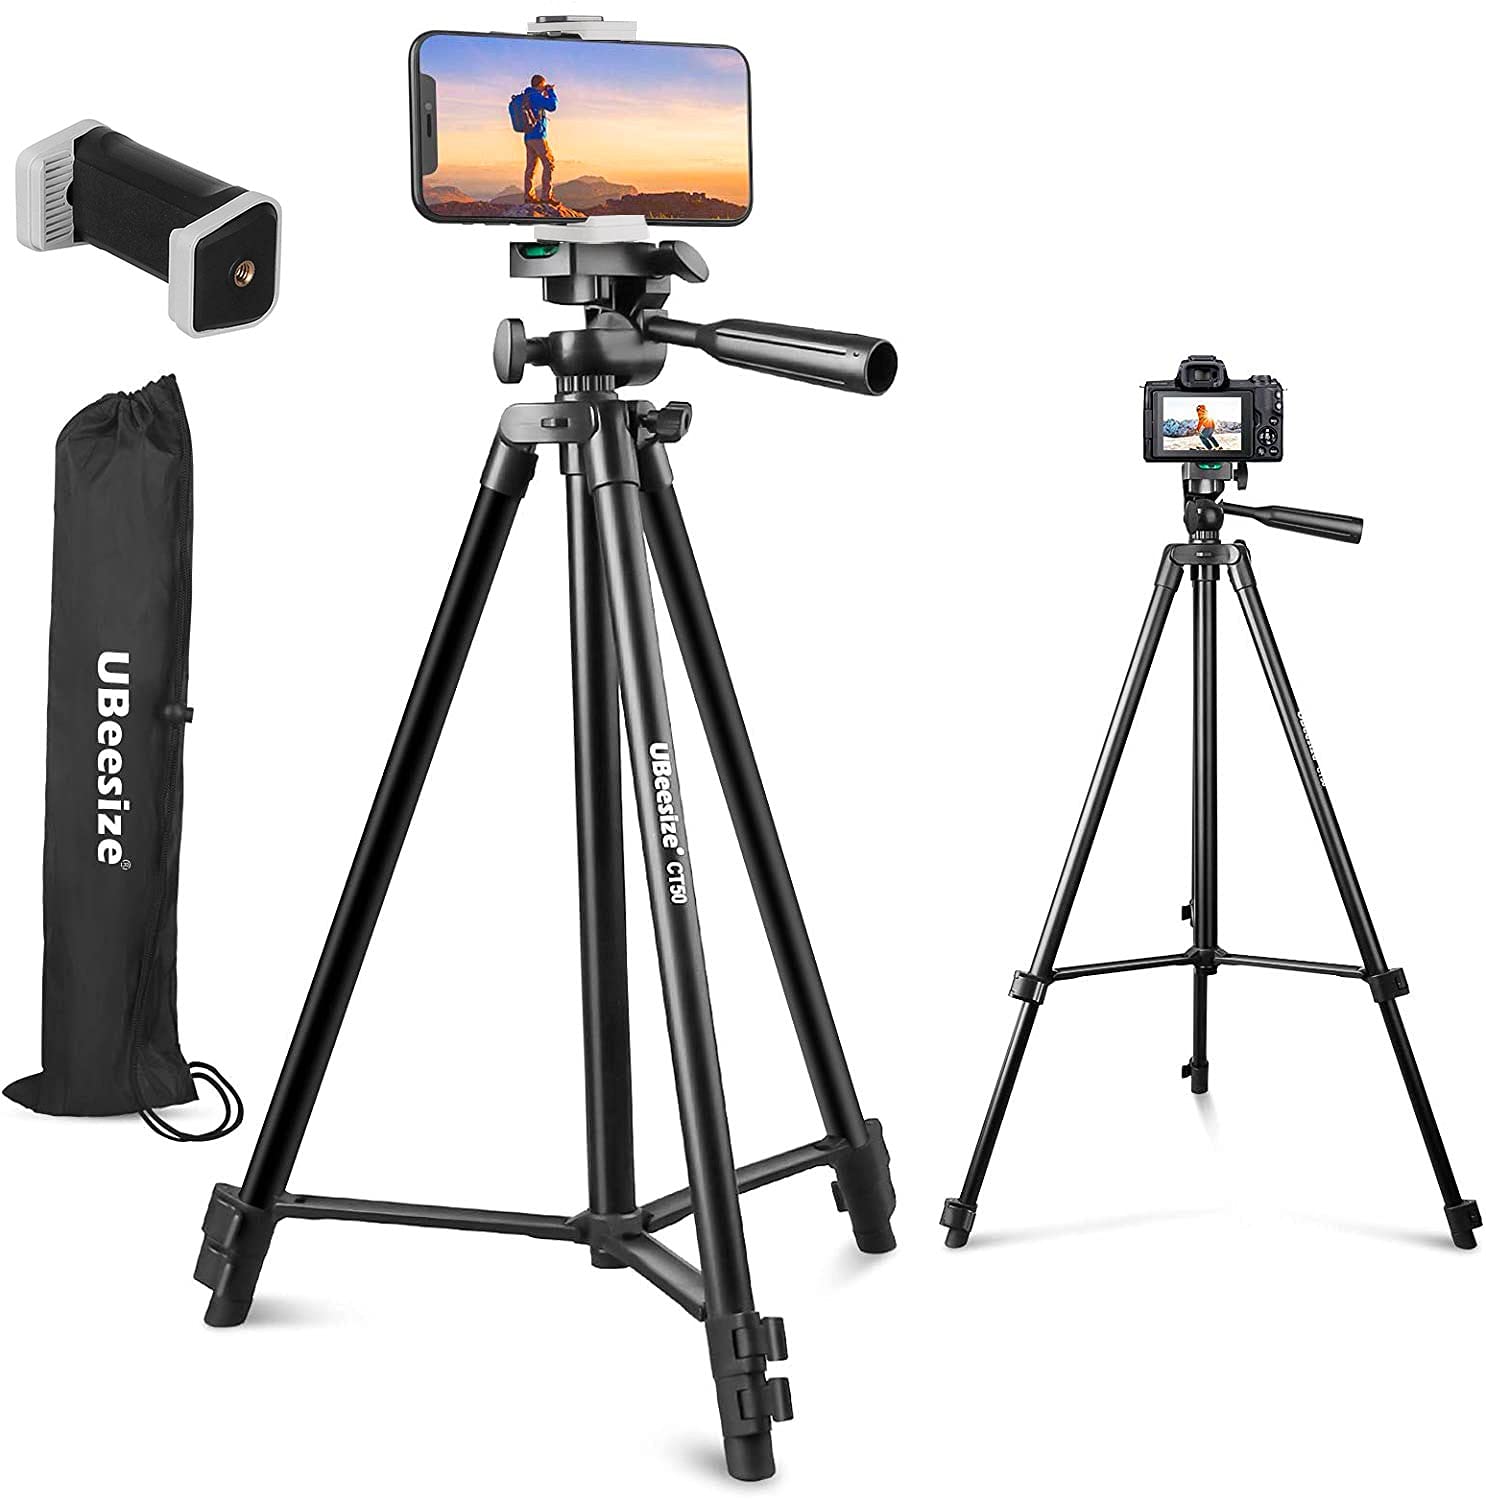 Tripod Carrying Bag Heavy Duty Multi Function Dual Use Outdoor for Umbrella